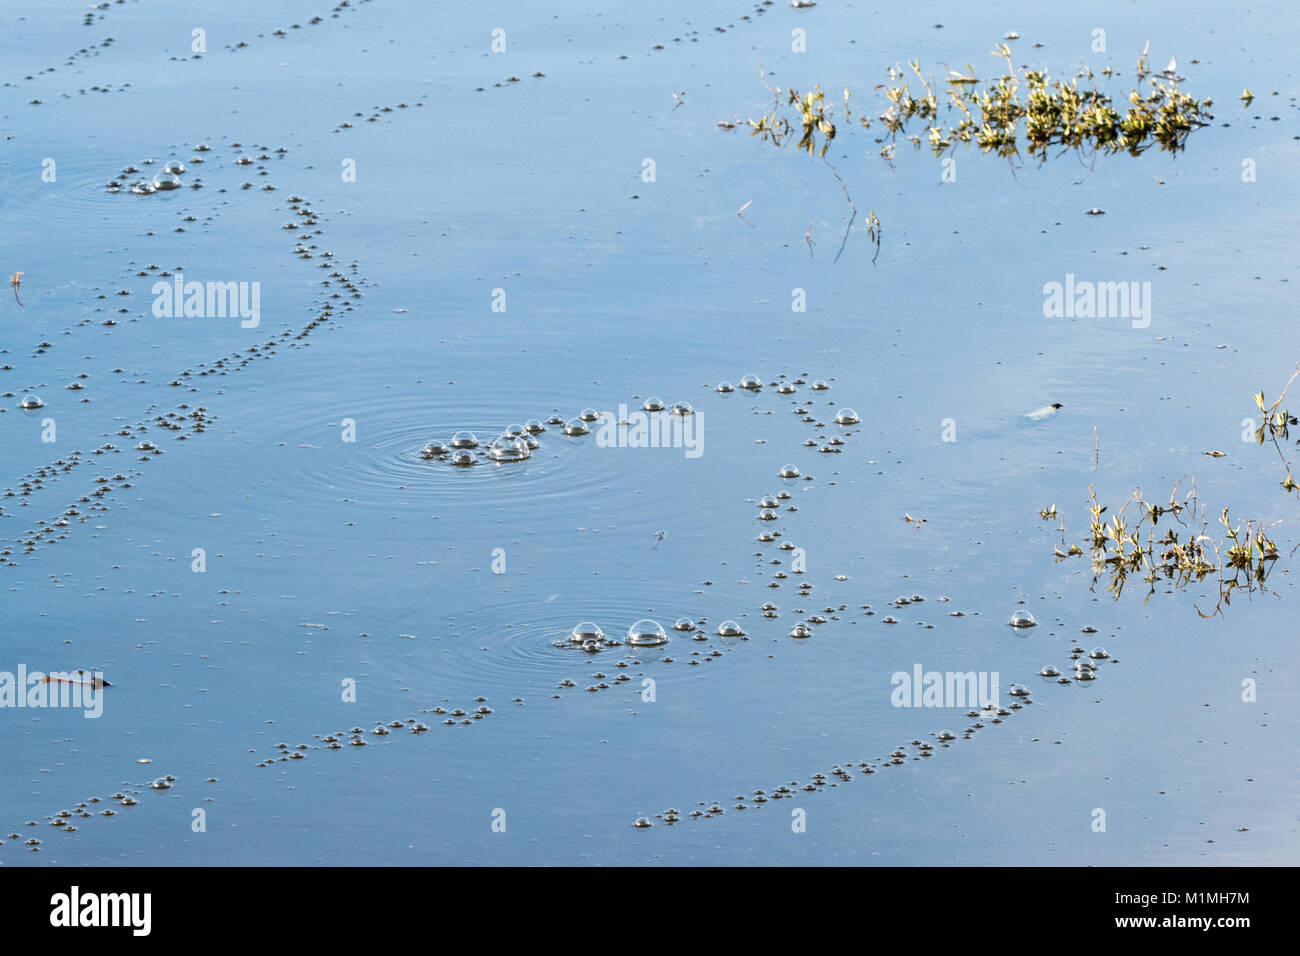 Bubbles from seaweed on a water surface Stock Photo